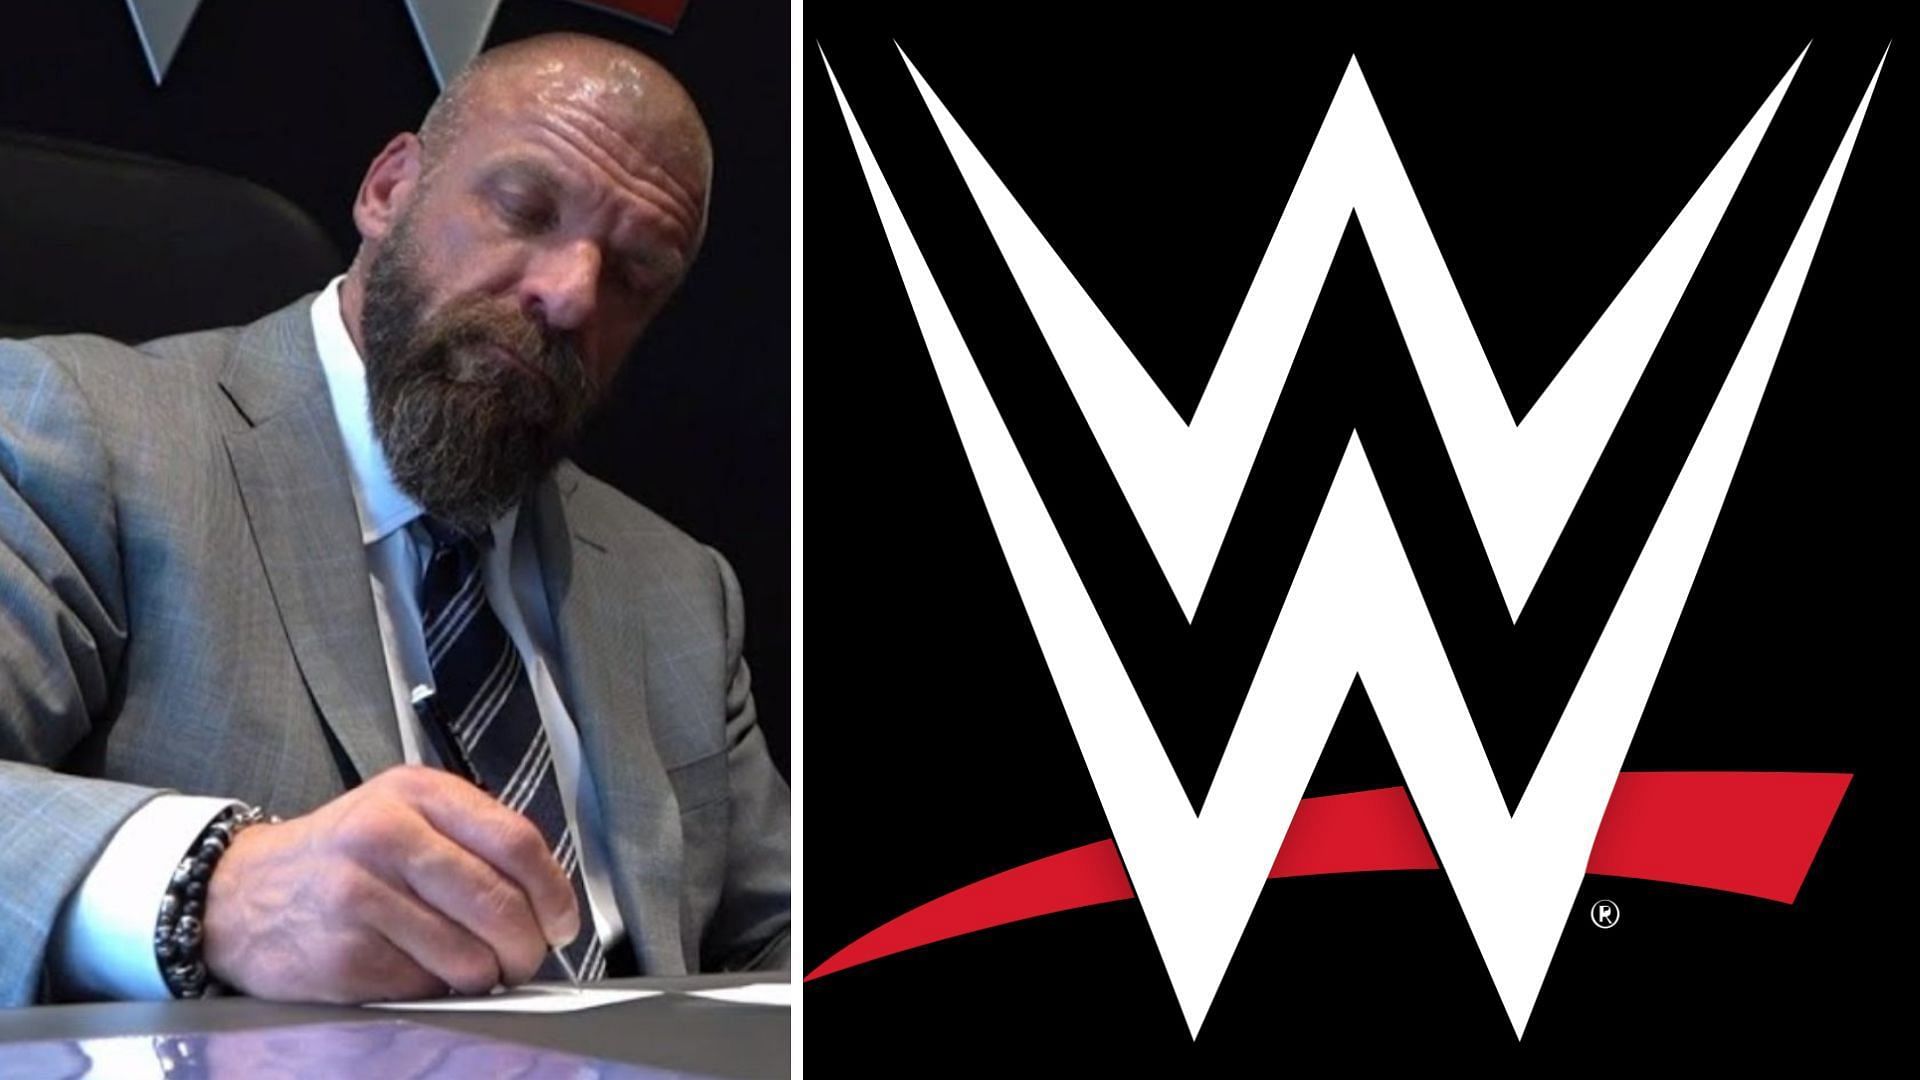 WWE Chief Content Officer Triple H